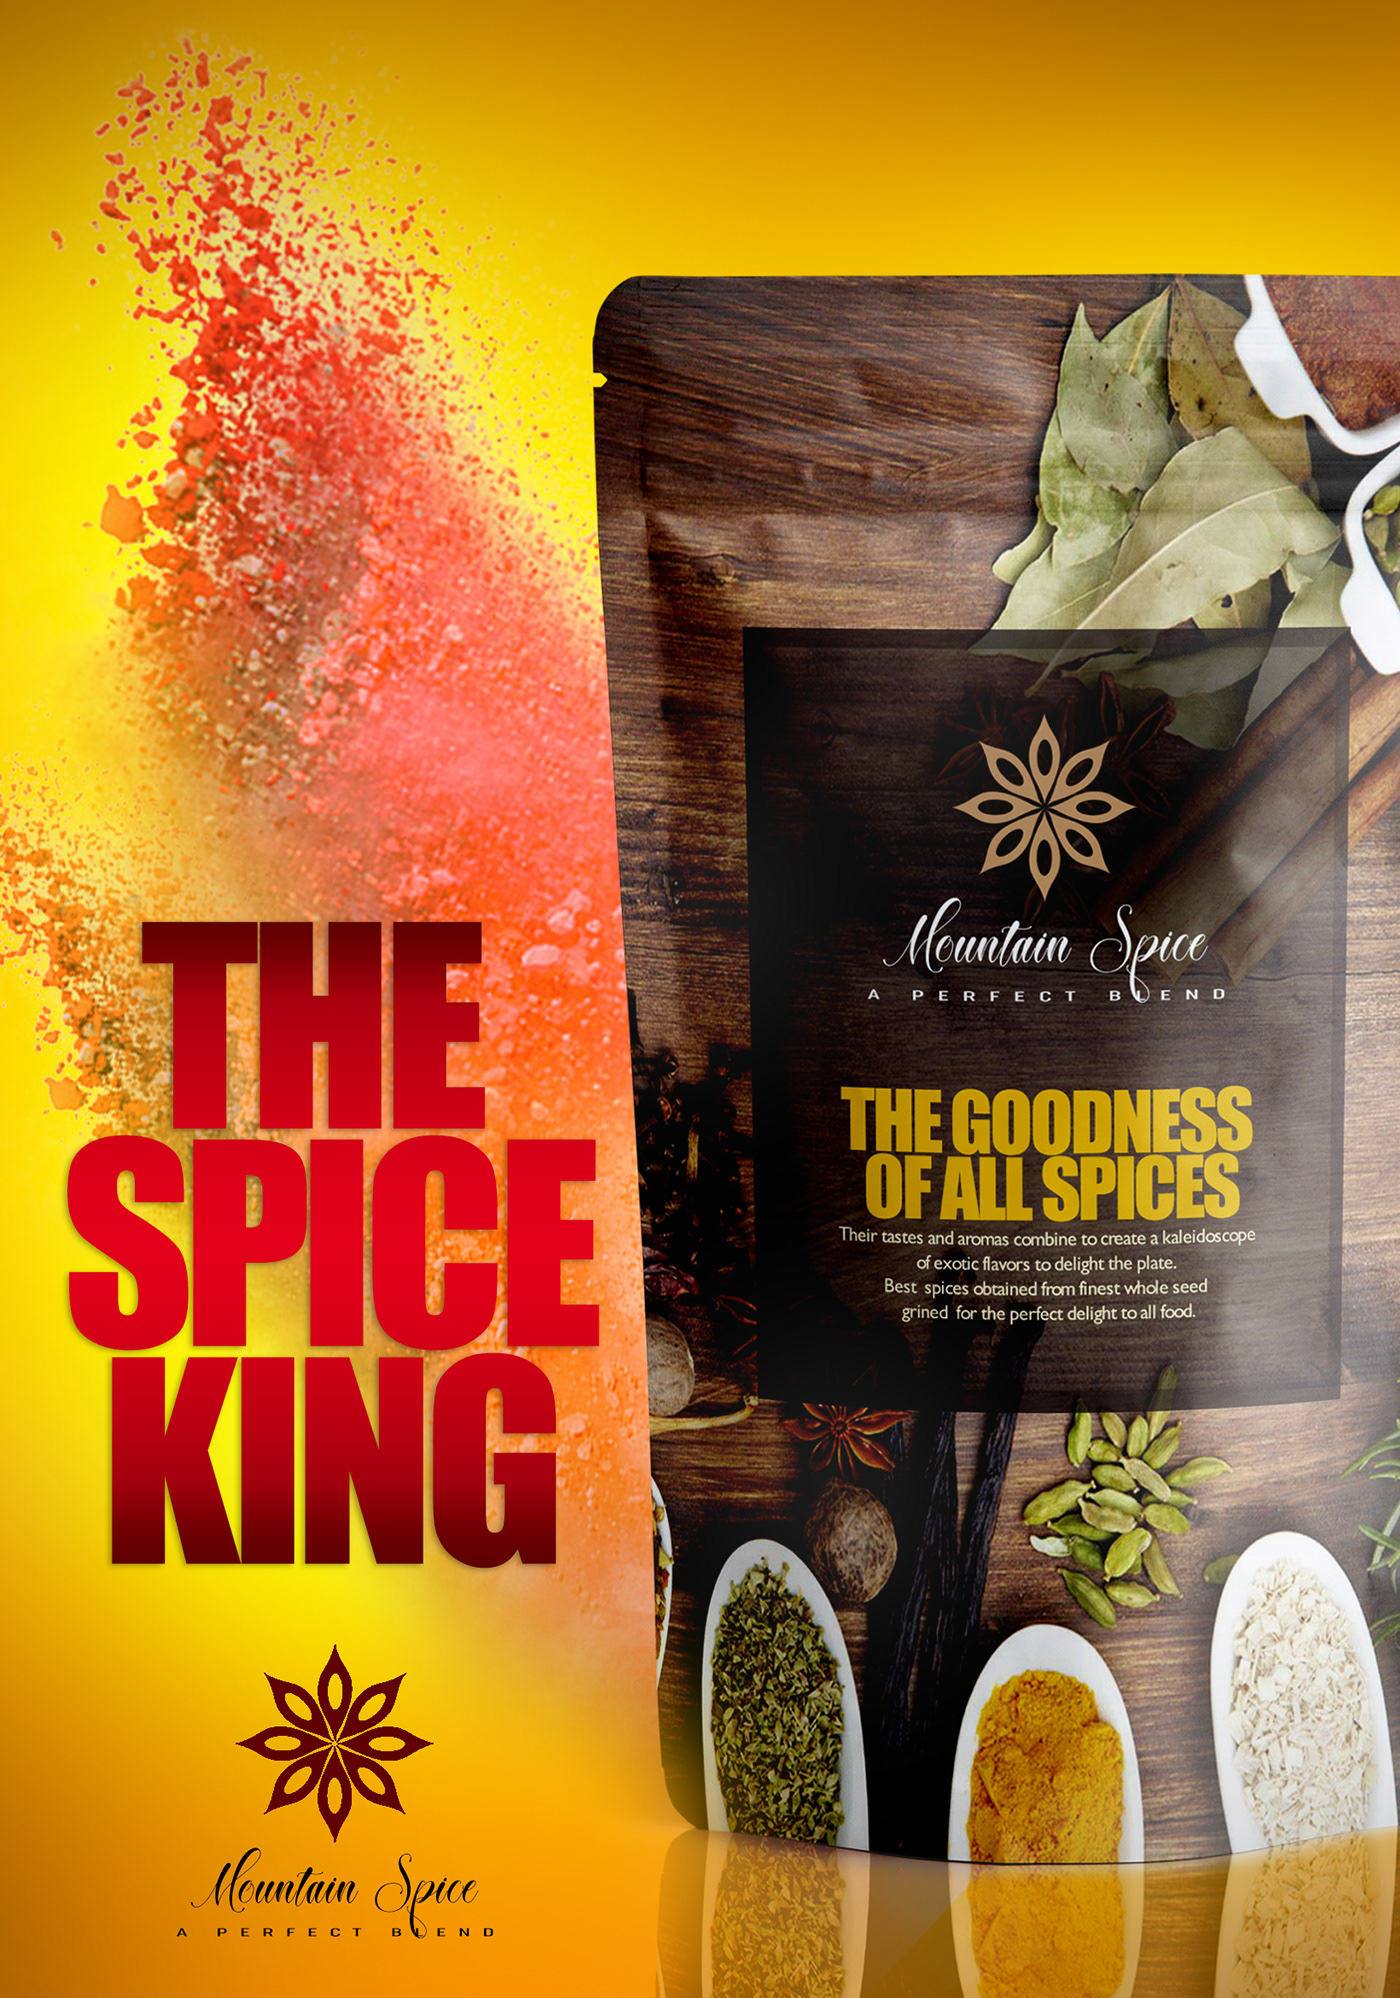 spice masala Indian Spice cooking spice spice blend